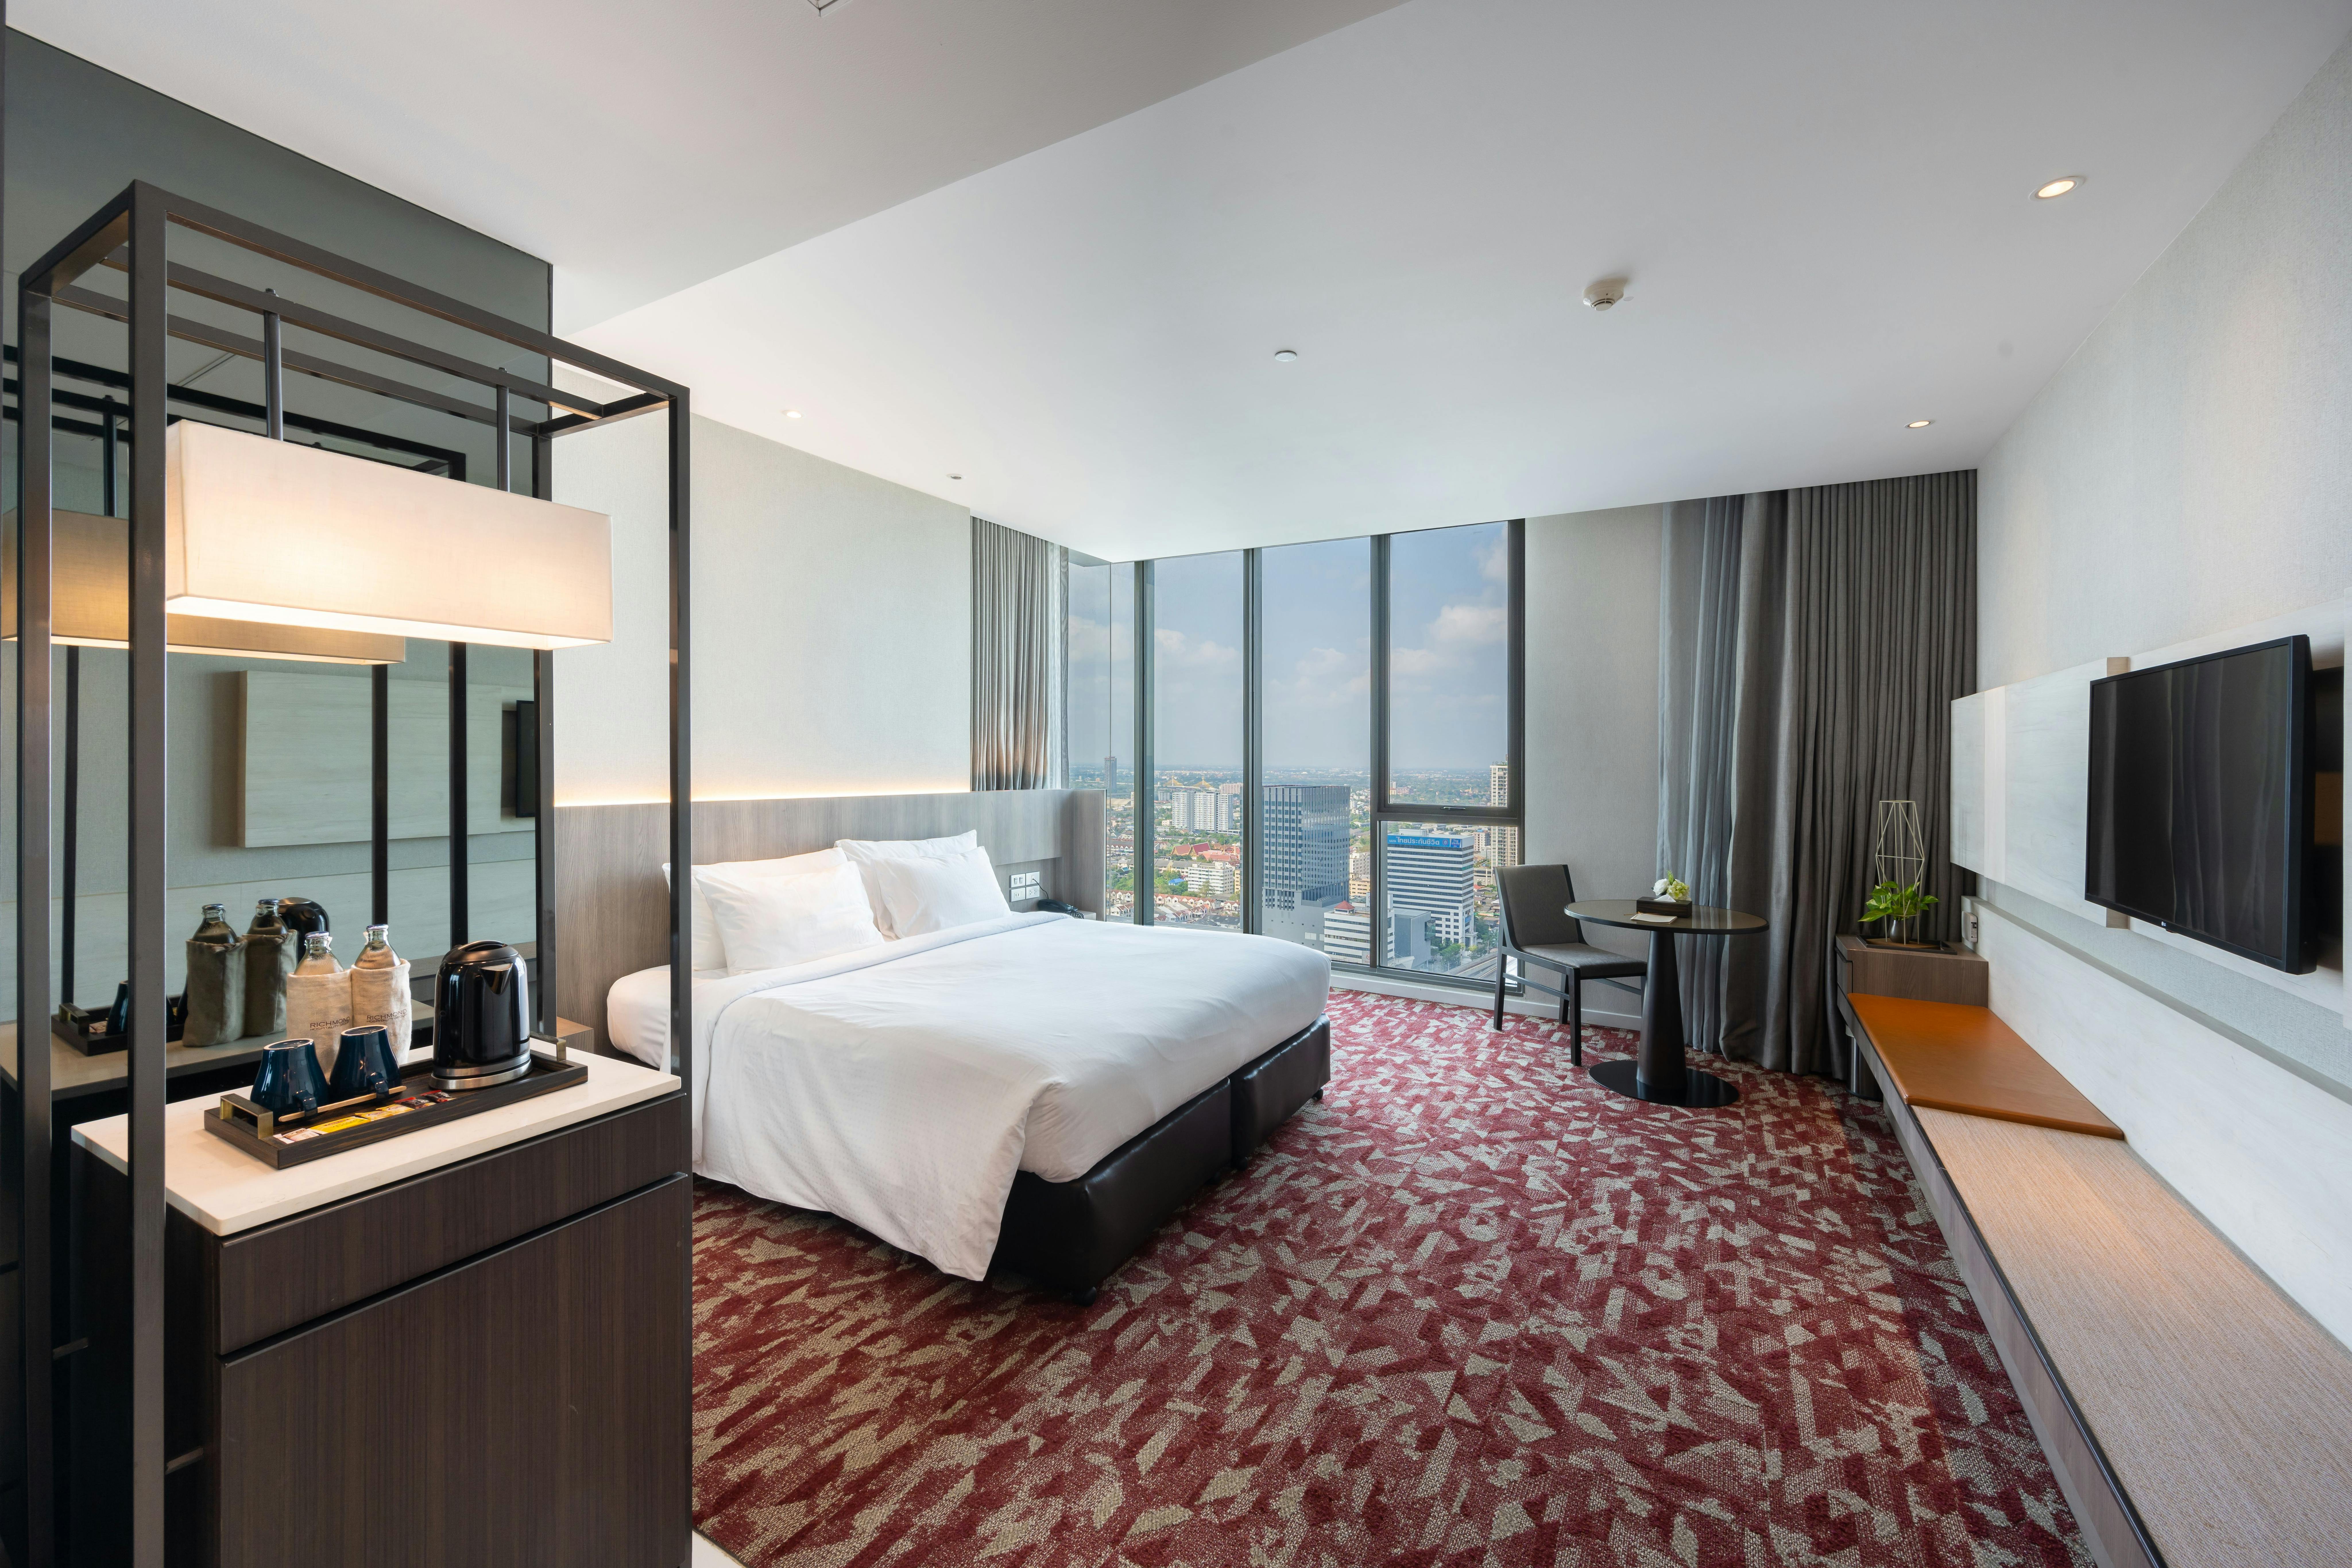 Bottom side view of Grand Deluxe room by showing the city view of Nonthaburi